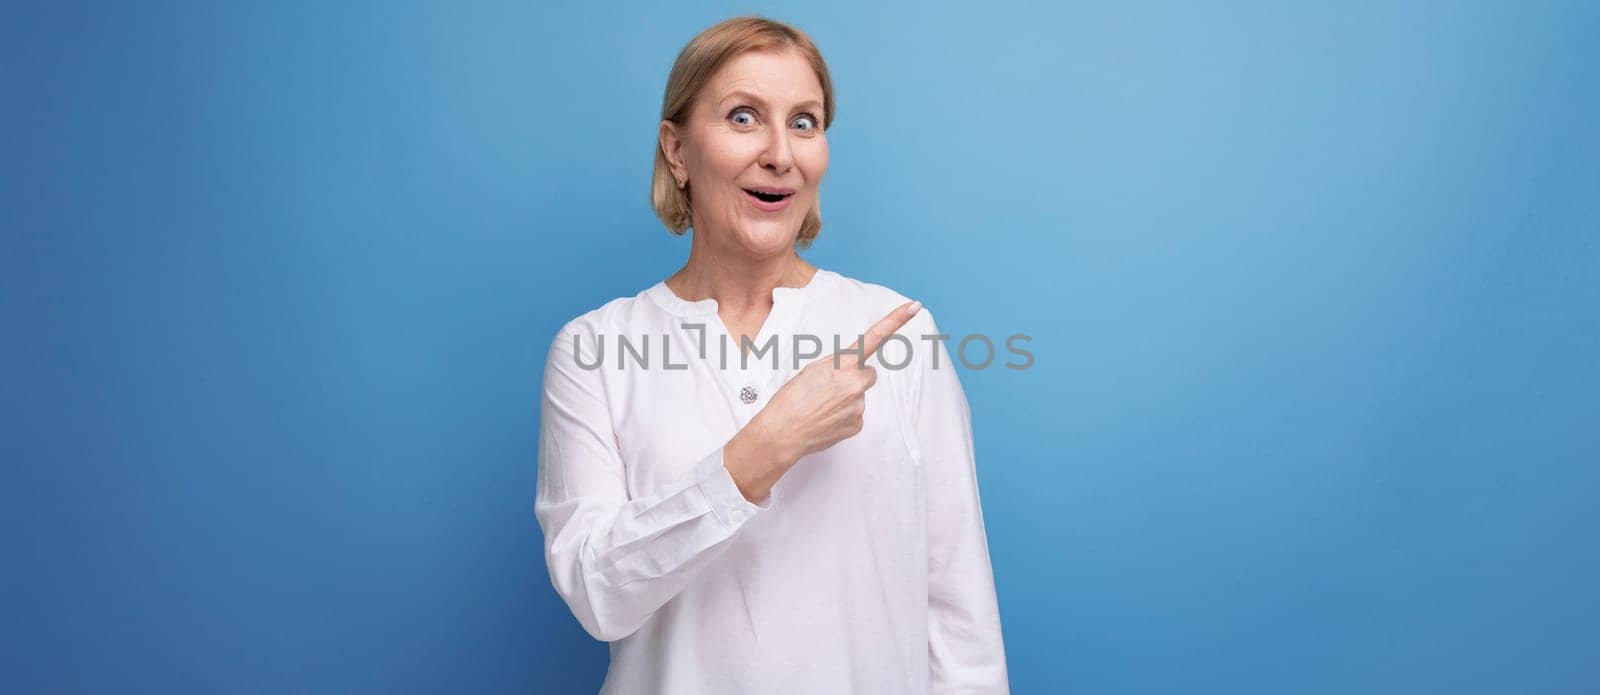 confident blond middle aged woman in white blouse pointing her finger to the side on studio background with copyspace by TRMK